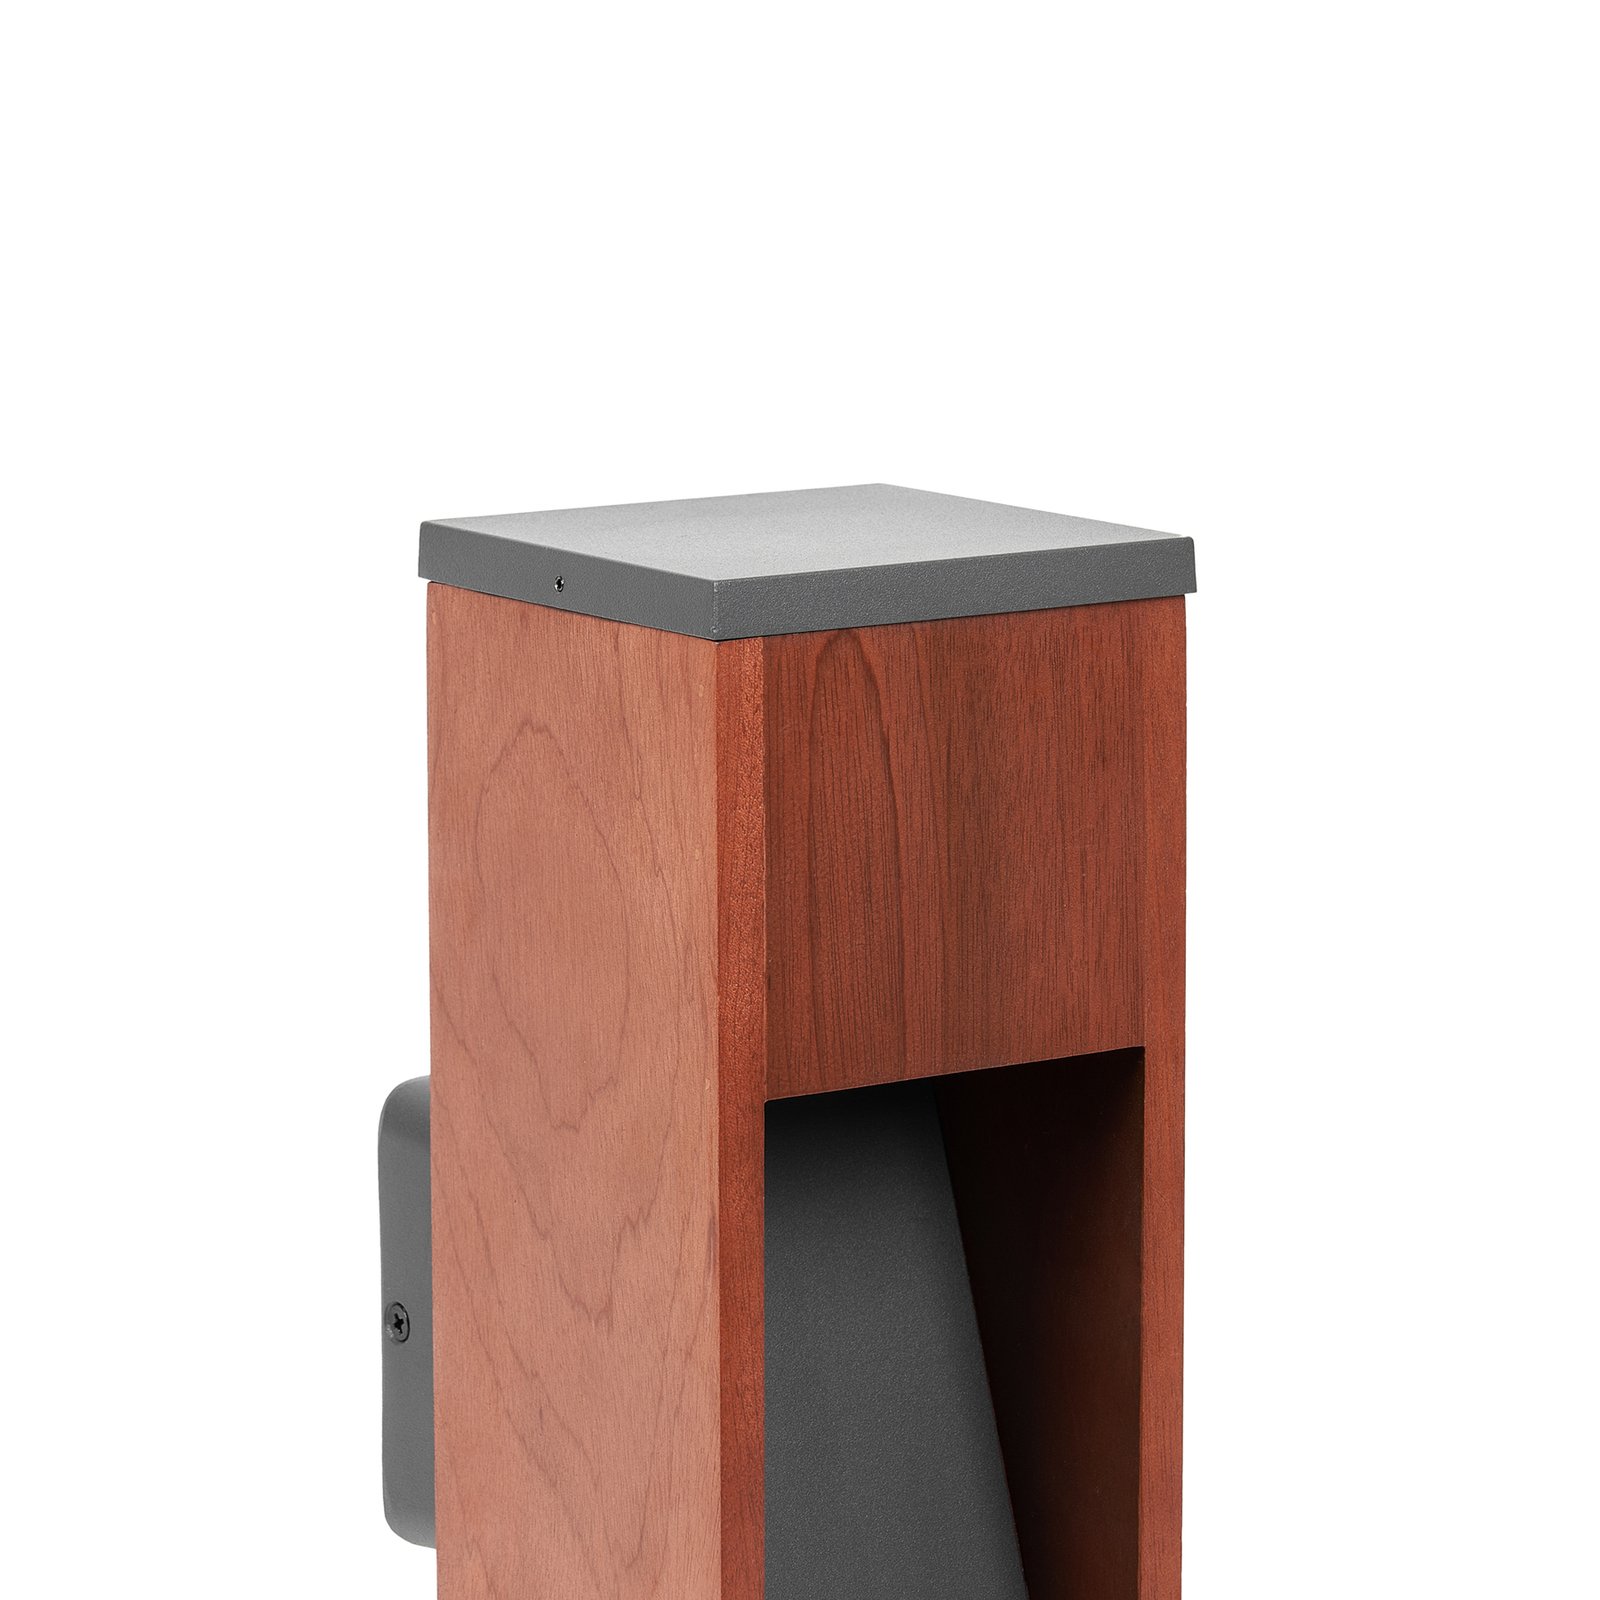 Lindby Fredo outdoor wall lamp made of teak